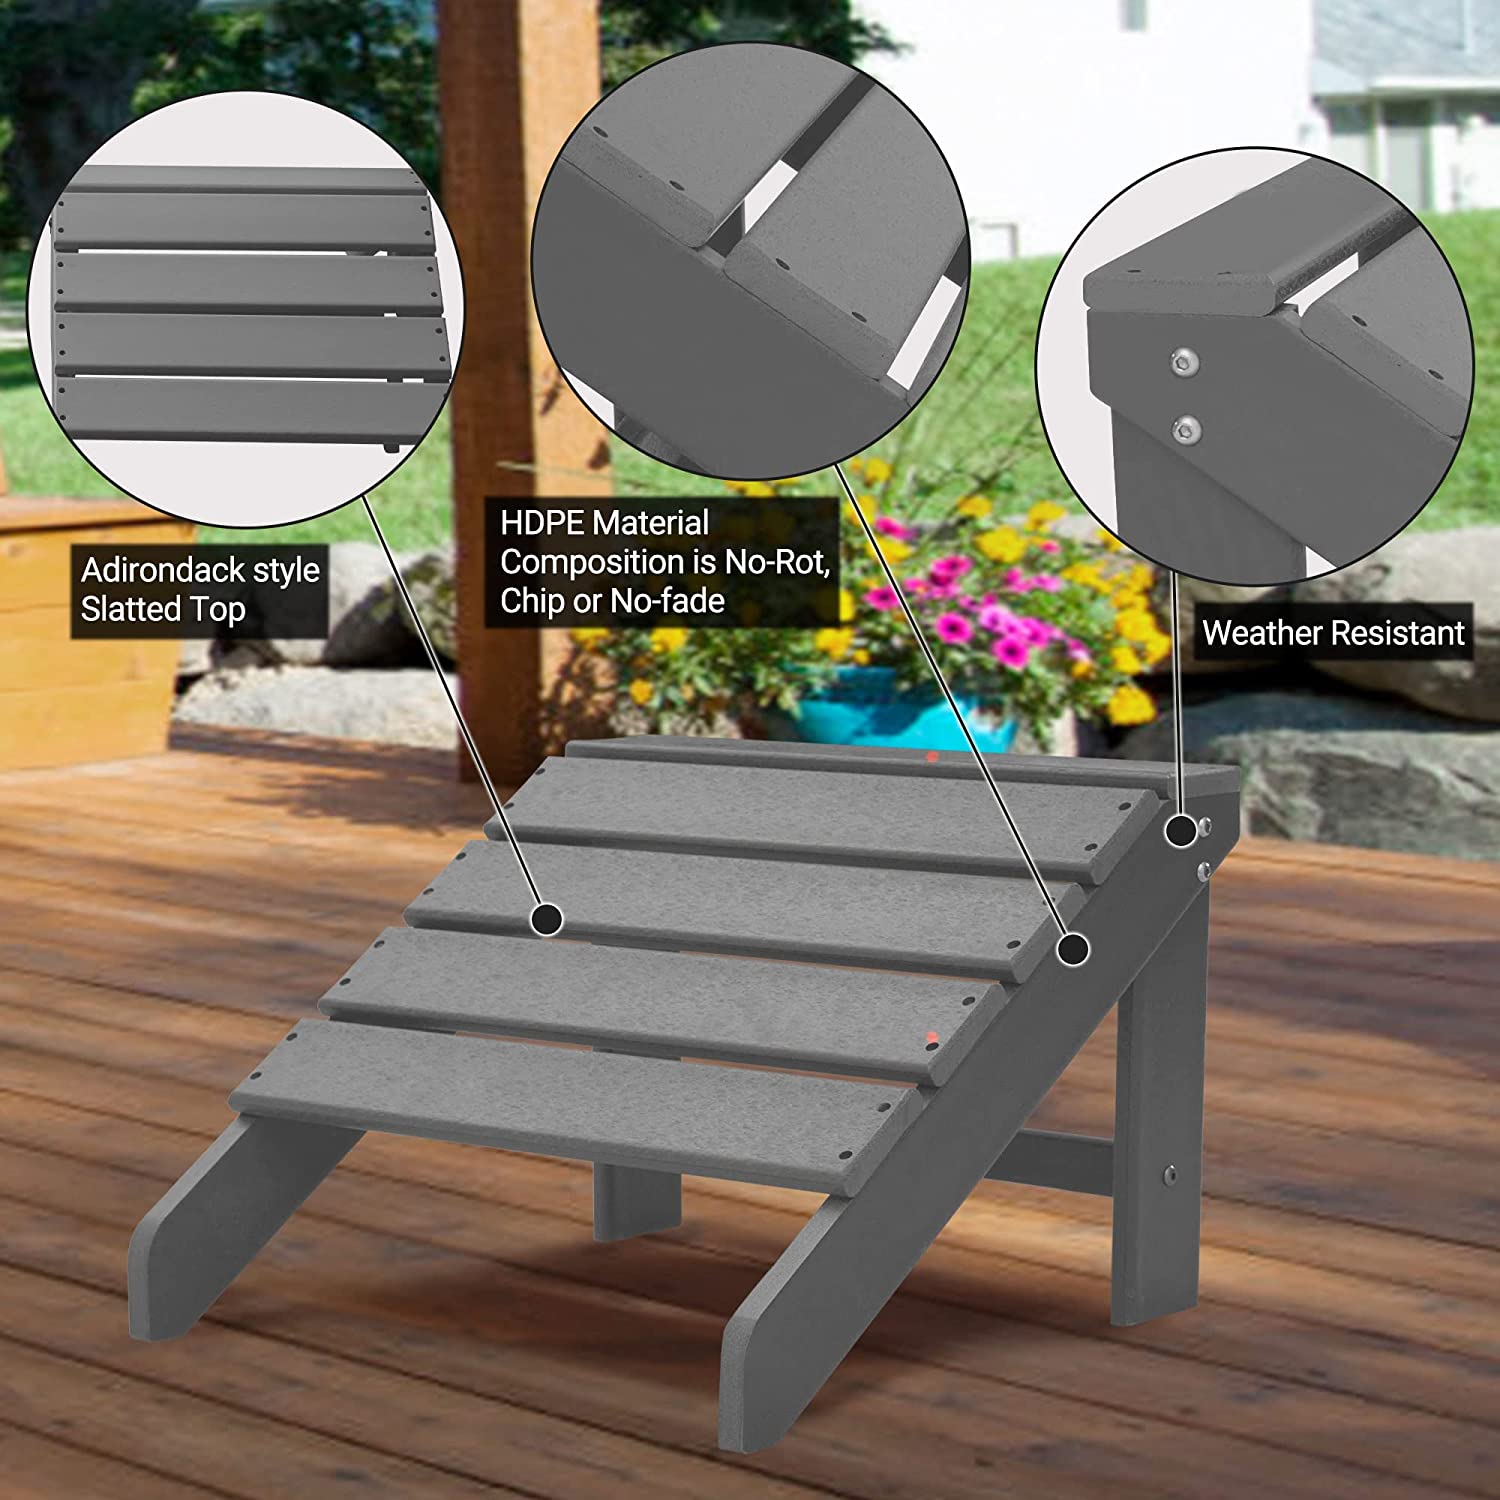 FHFO Adirondack Ottoman and Side Table for Adirondack Chairs, 2 Pieces Outdoor Adirondack Footrest & 1 Piece End Table, Weather Resistant Footstool Table for Adirondack Chair （Grey） - image 3 of 5